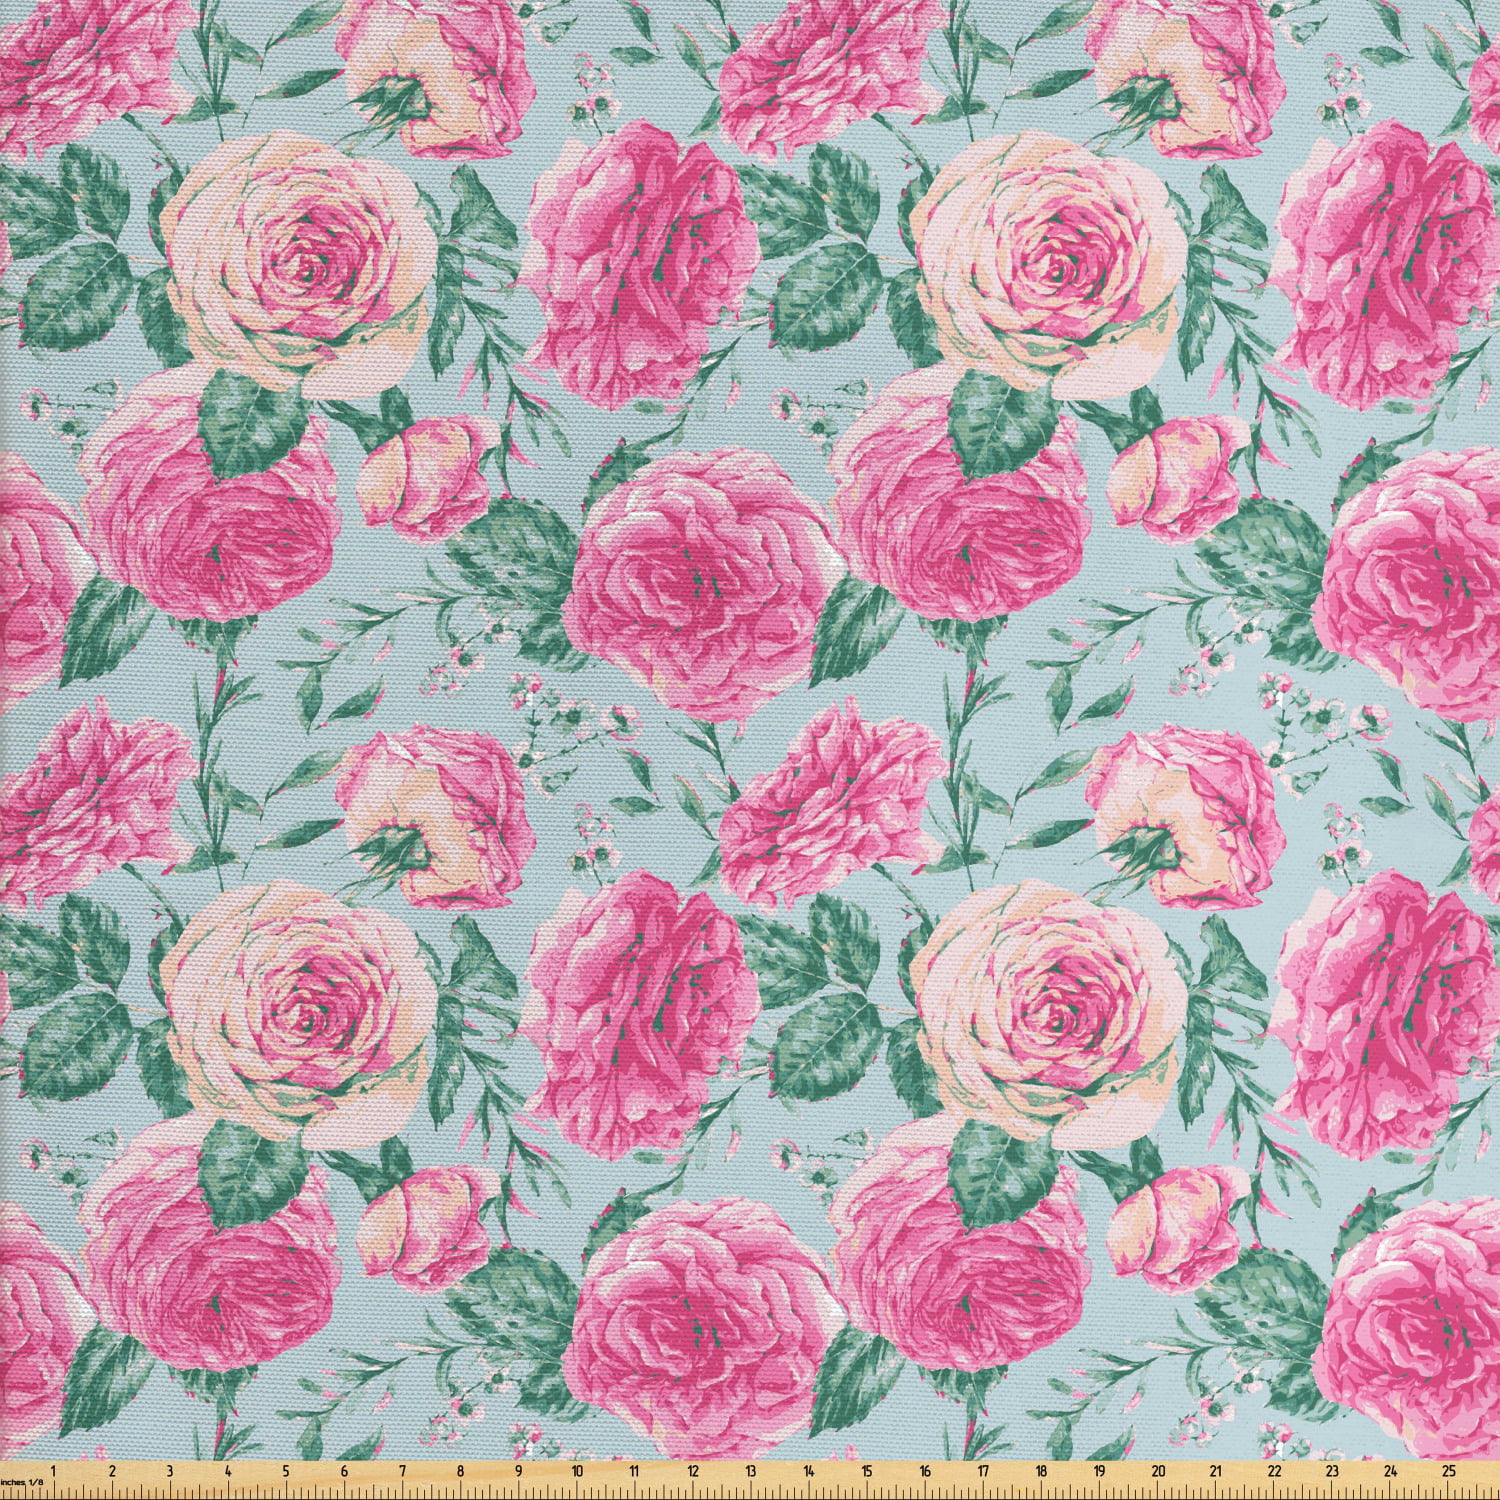 Vintage Rose Fabric by The Yard, Grungy Look Flower Arrangement